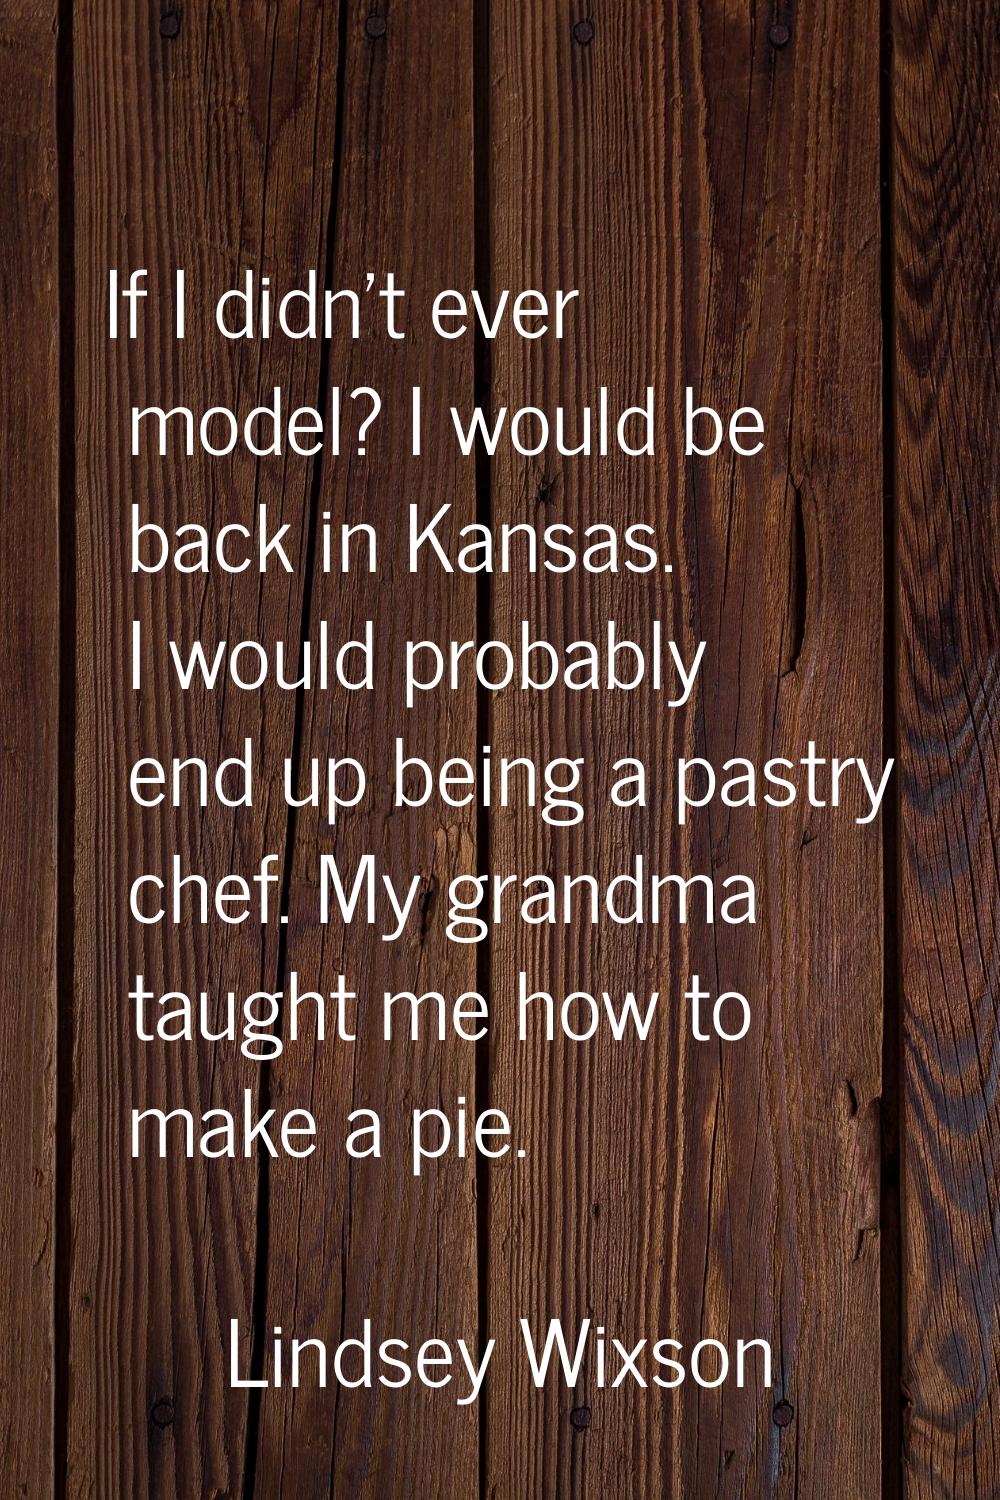 If I didn't ever model? I would be back in Kansas. I would probably end up being a pastry chef. My 